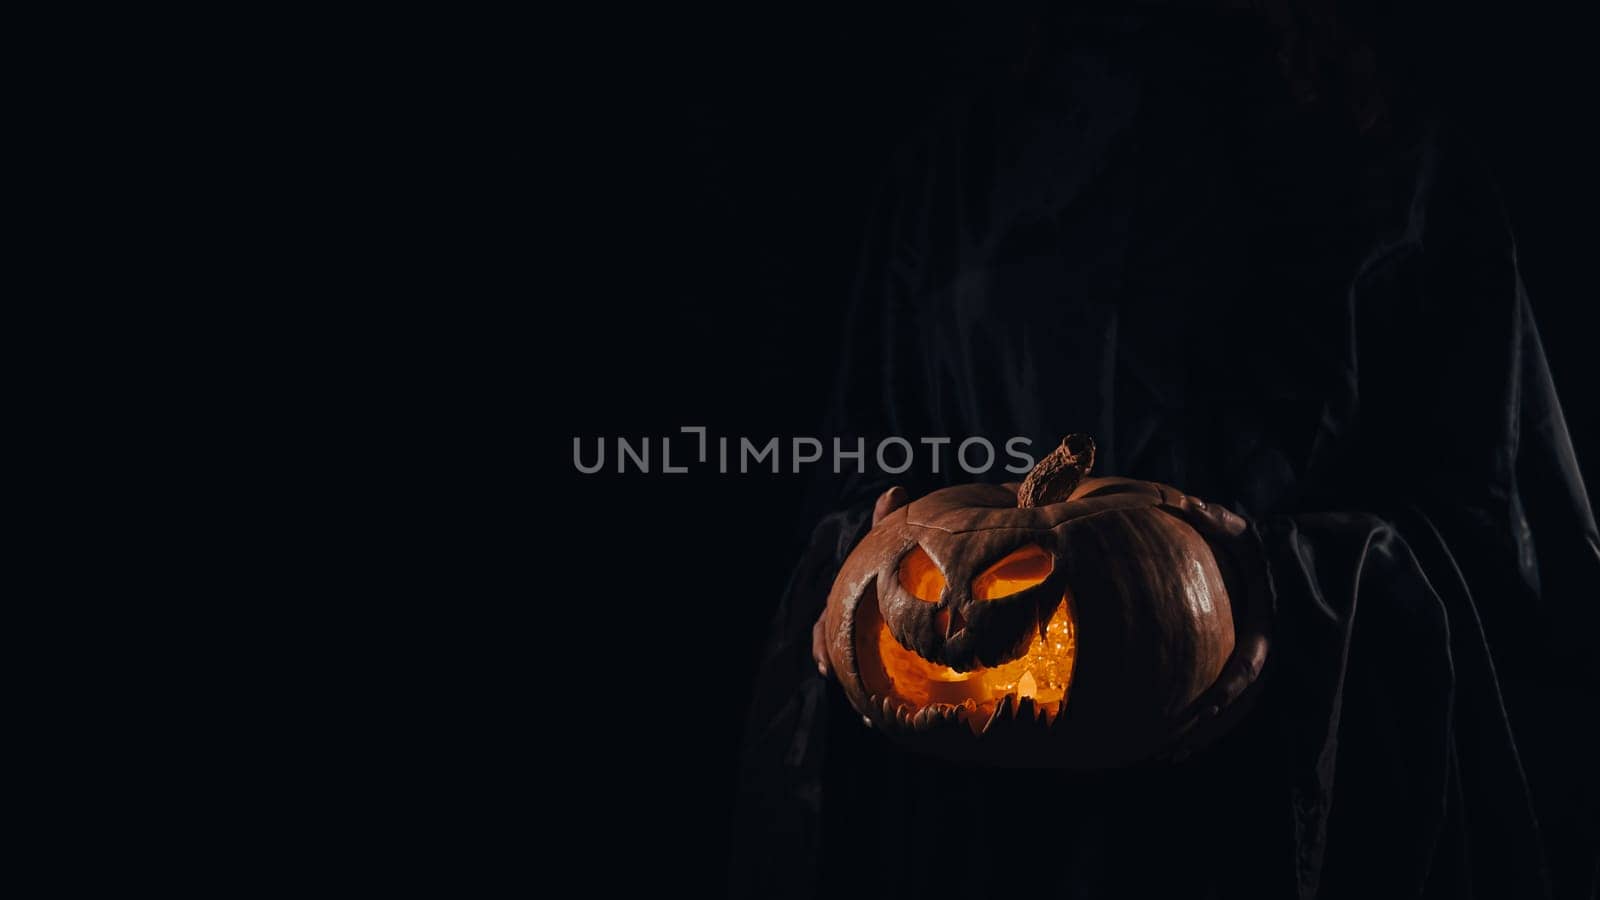 The witch is holding a pumpkin jack o lantern glowing in the dark. Halloween. by mrwed54